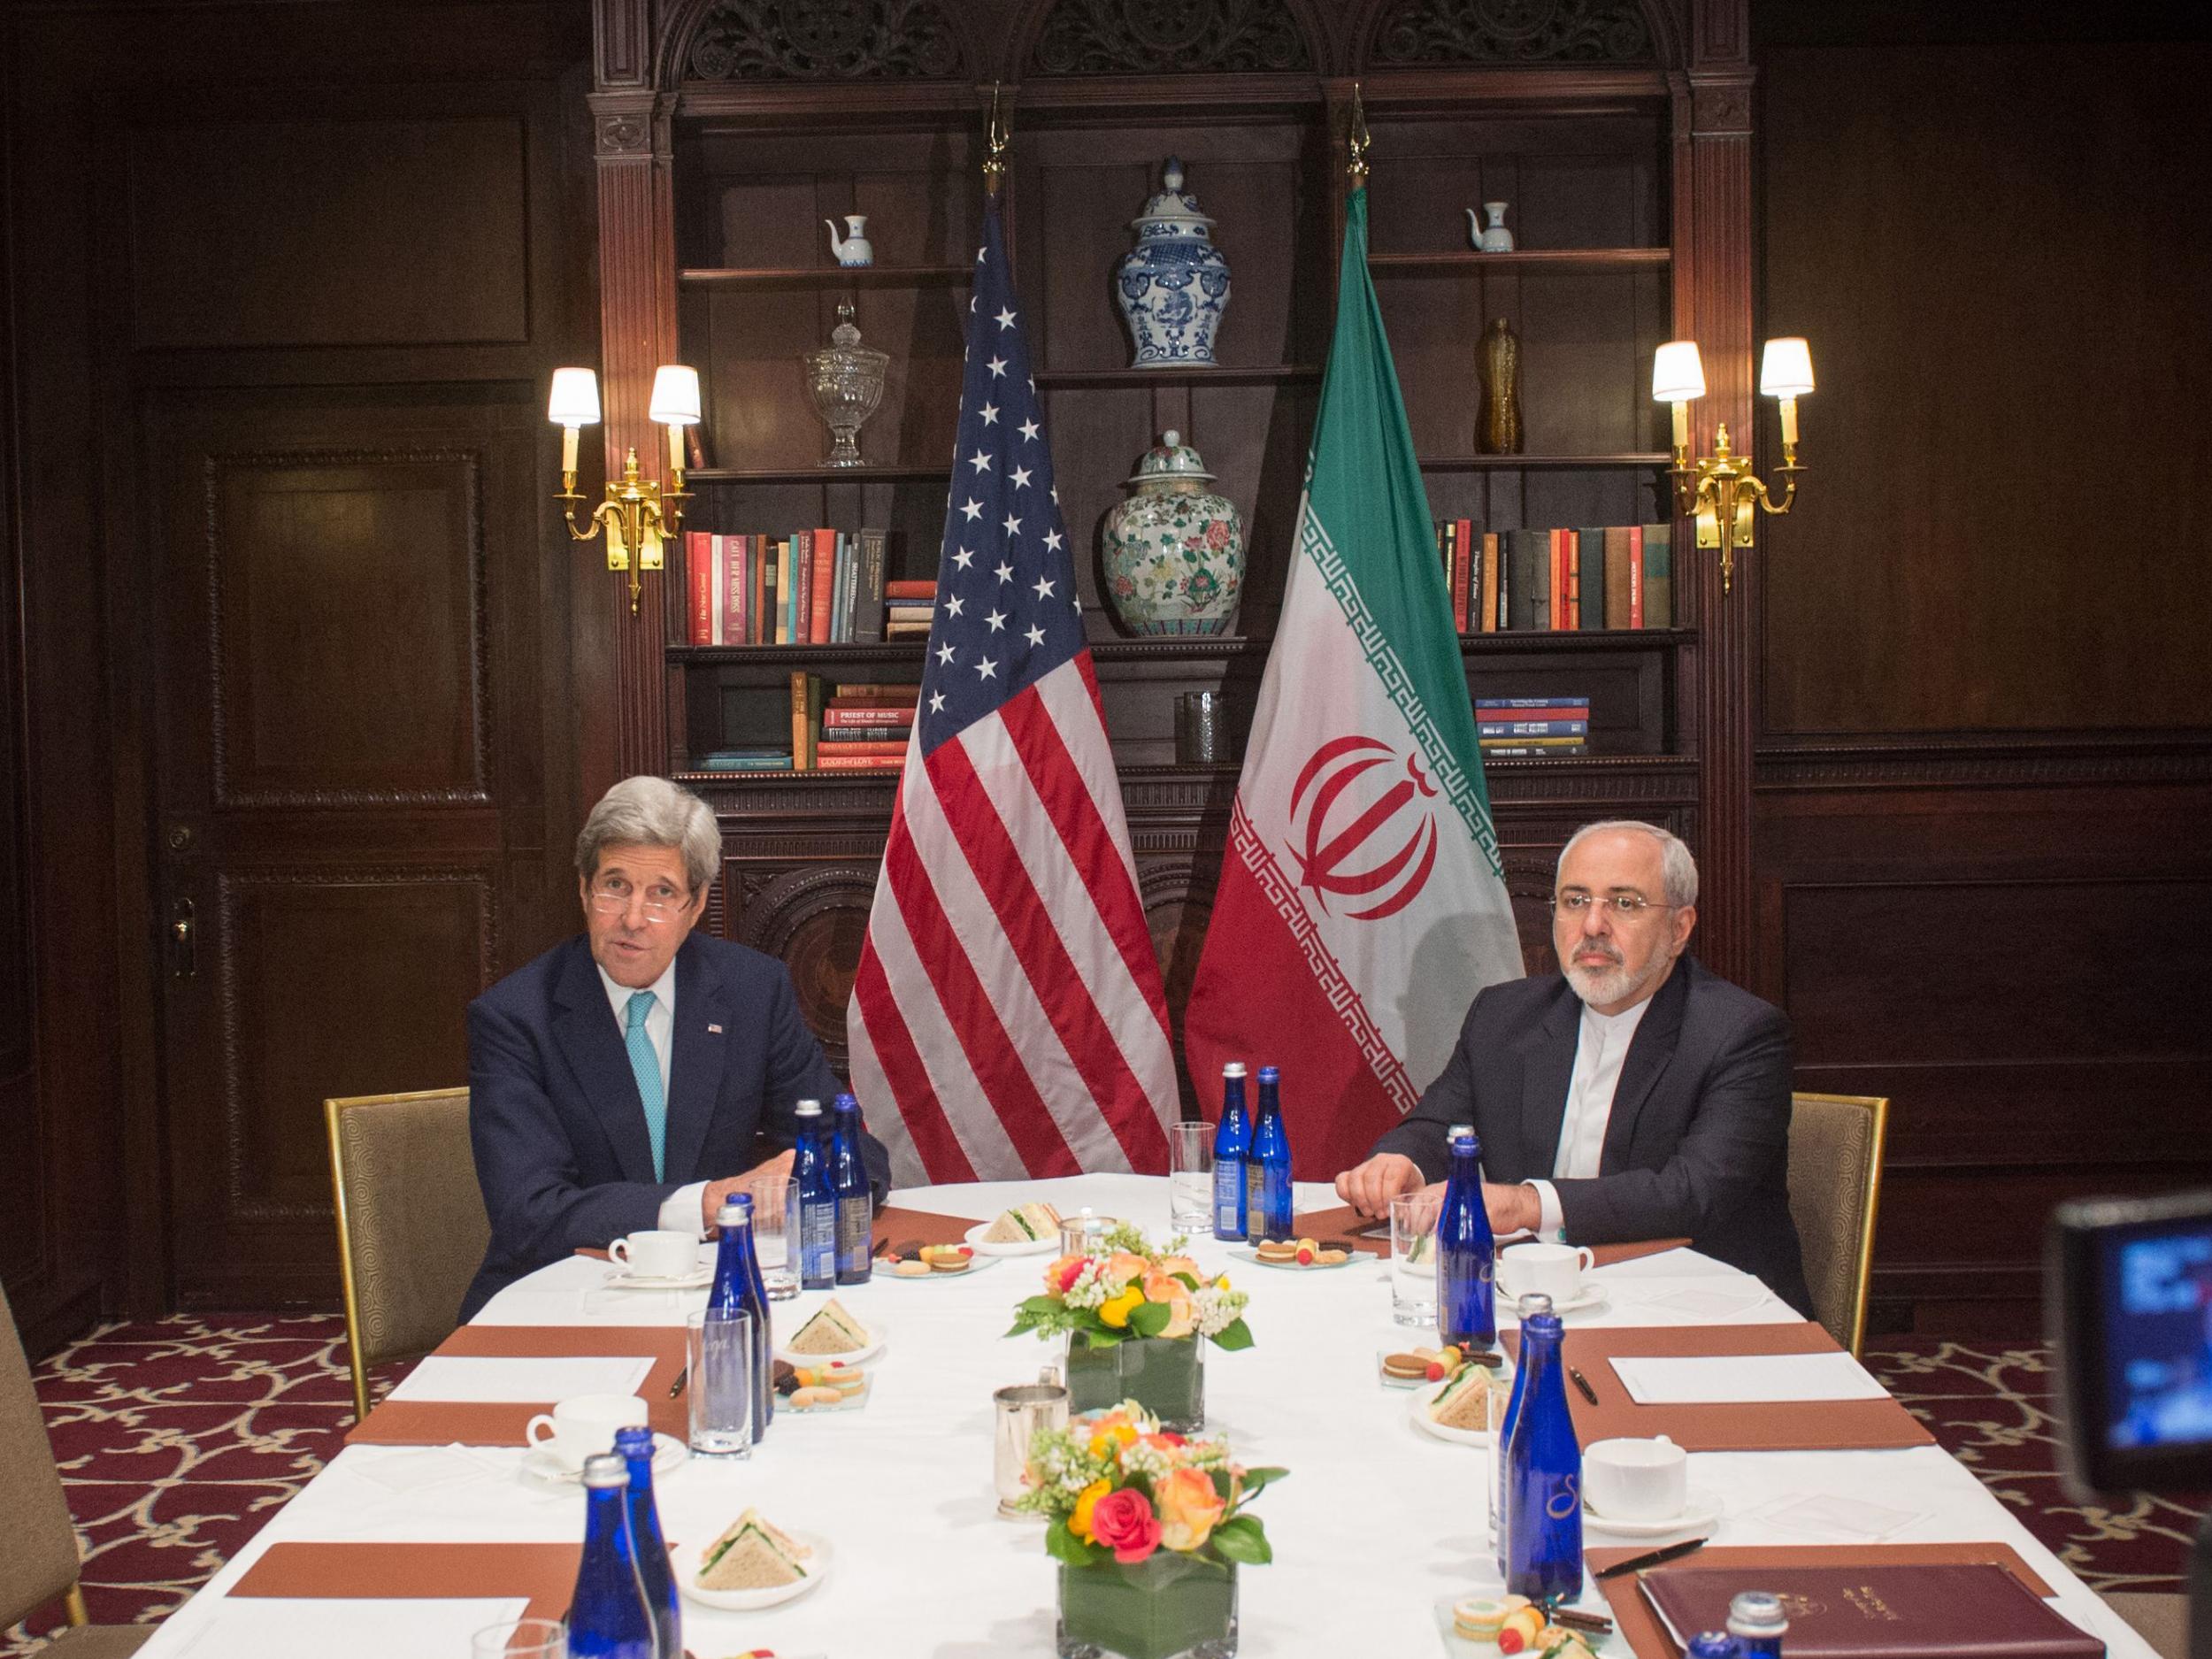 John Kerry meets Iran's Foreign Minister Mohammad Javad Zarif in April 2016